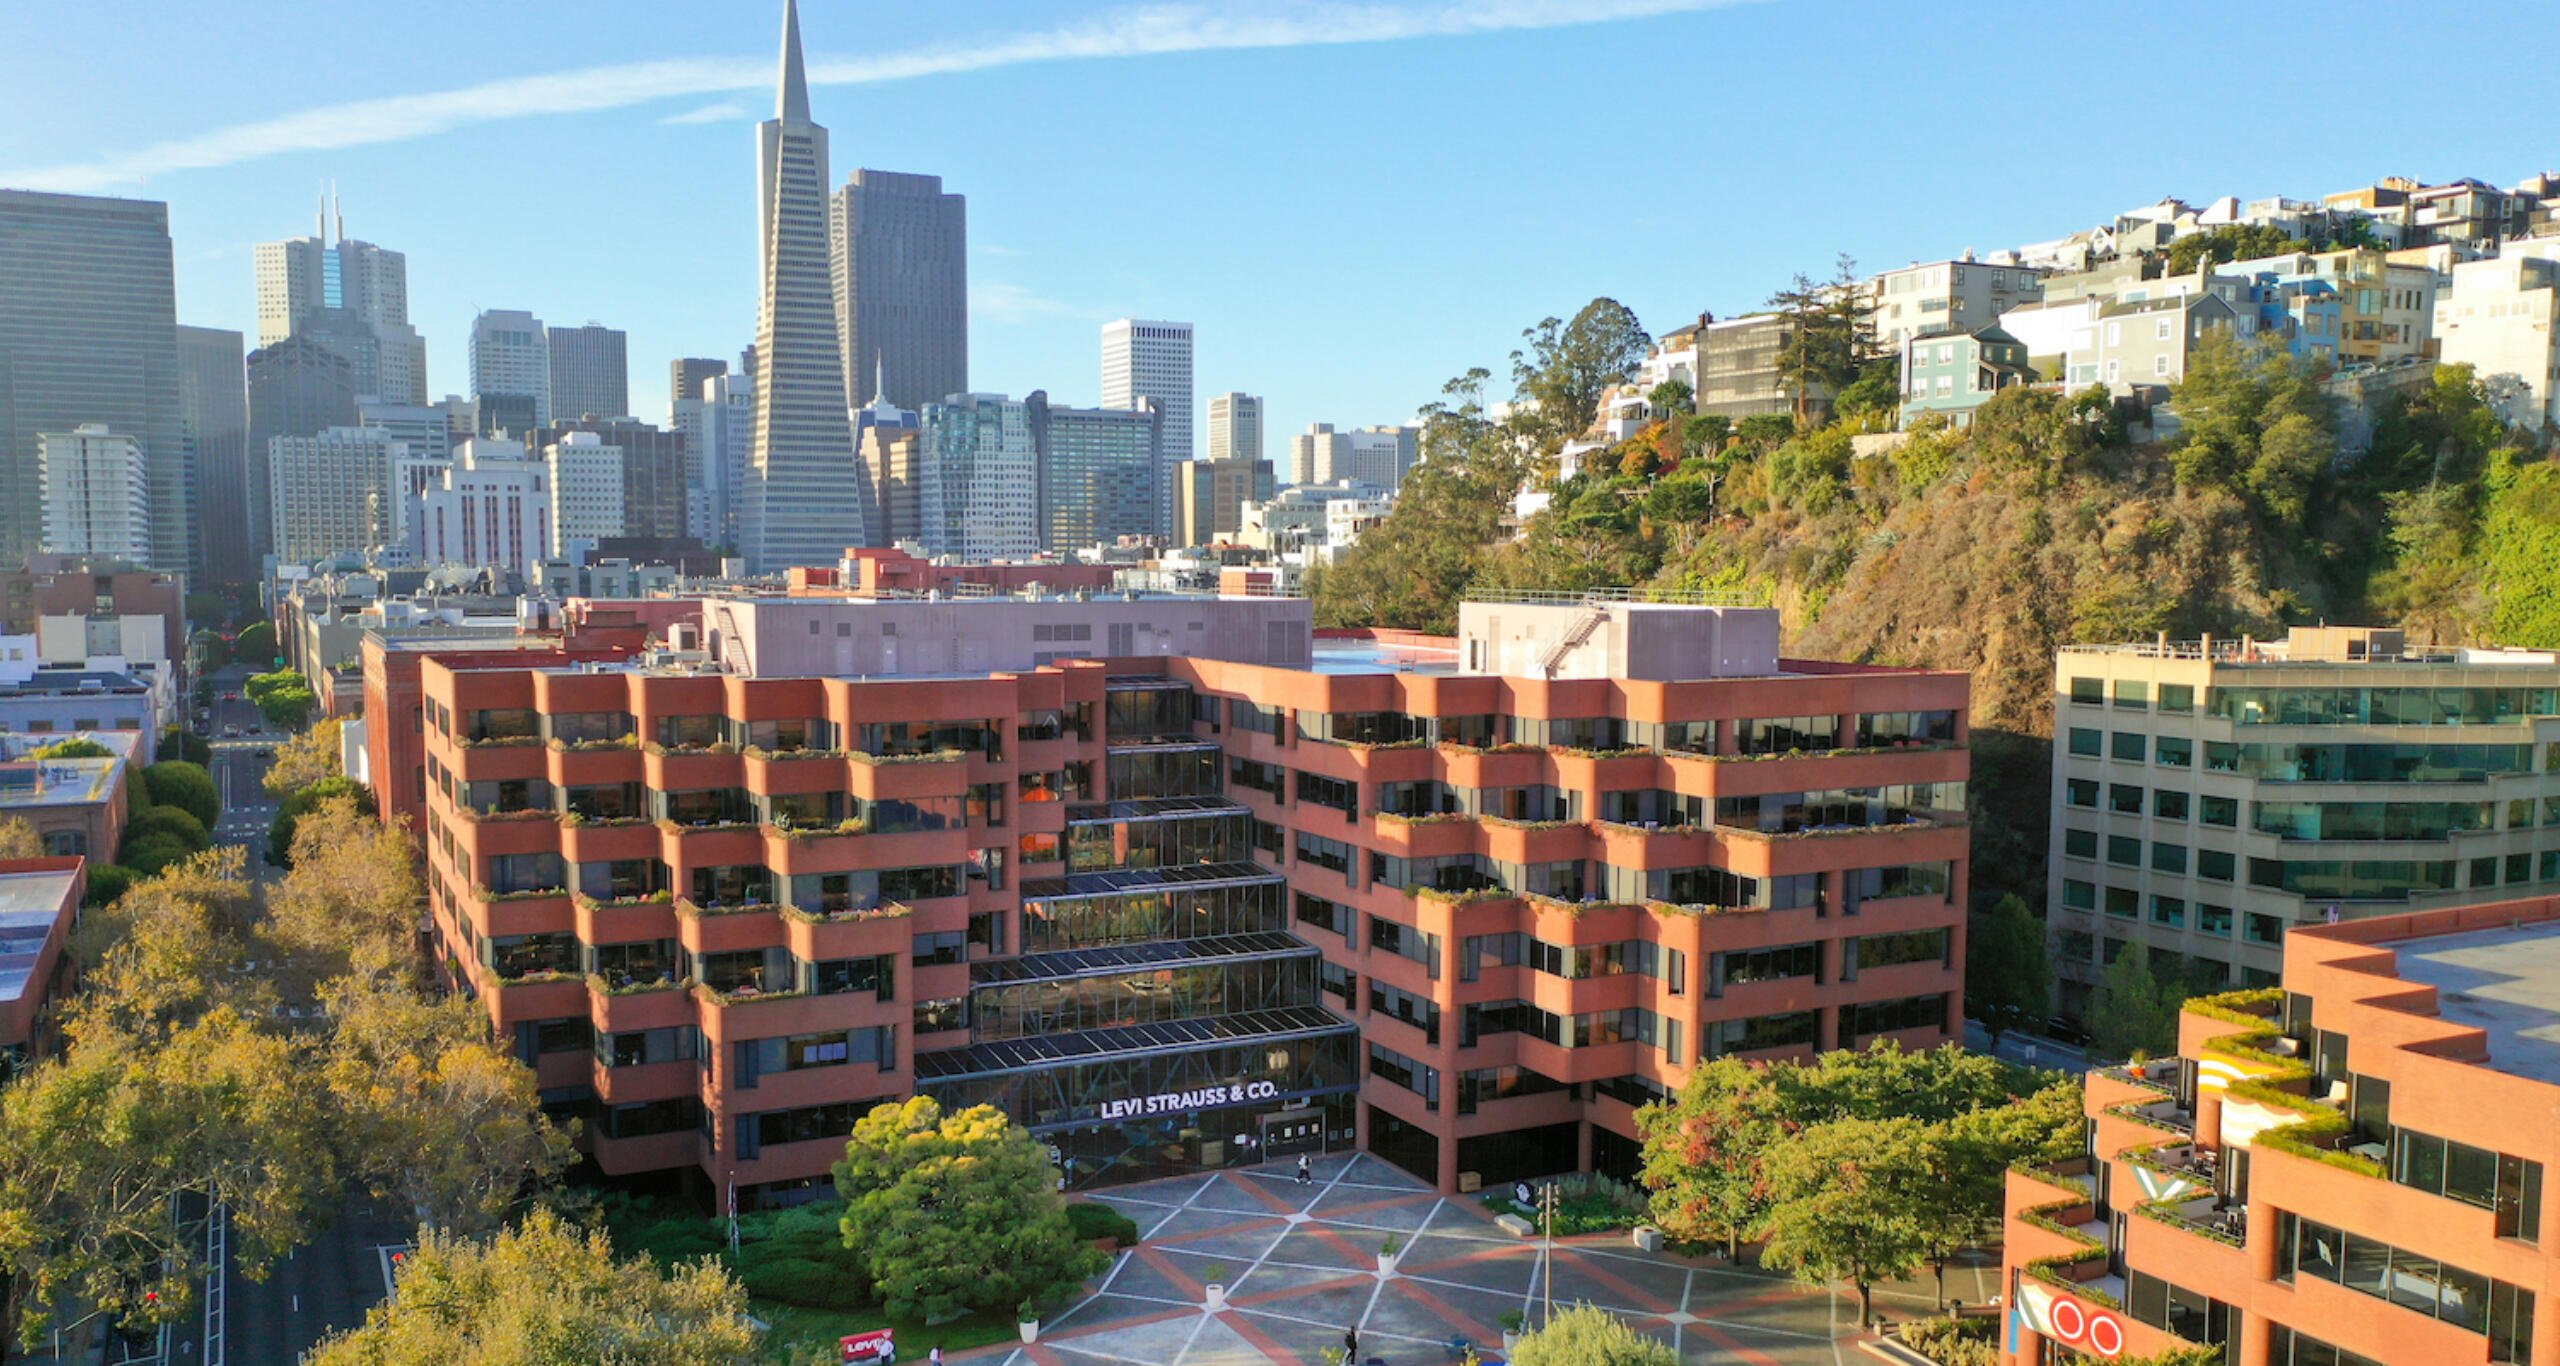 Levis Plaza with the San Francisco skyline in the background viewed from above